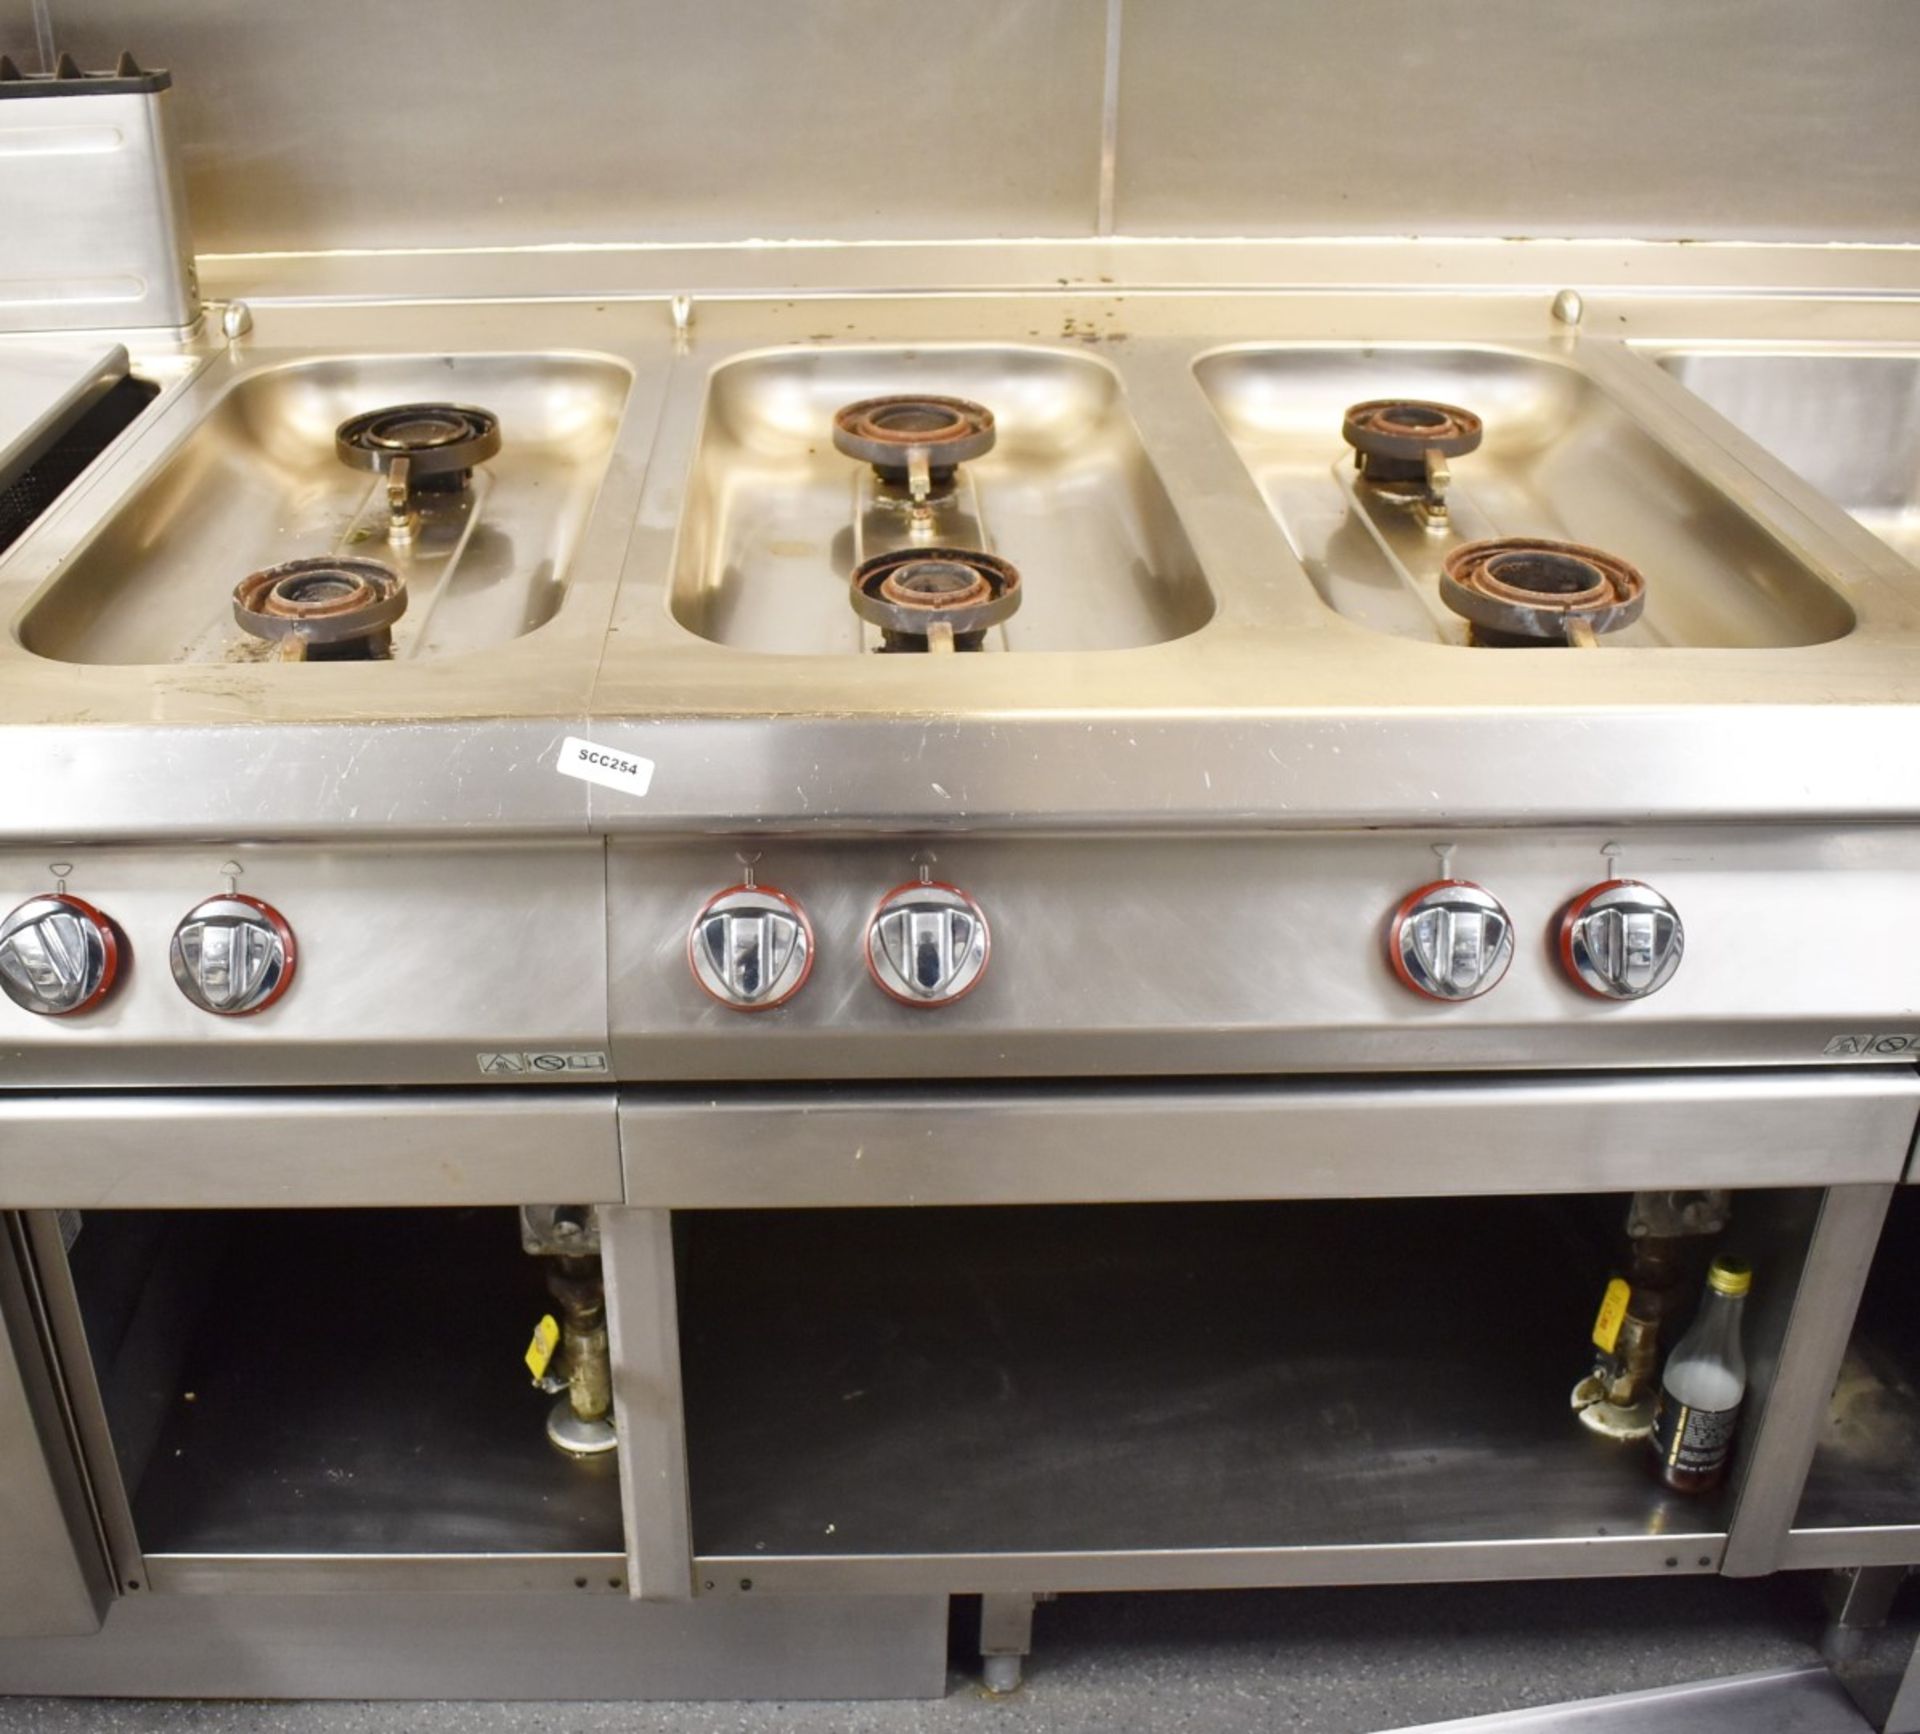 2 x Angelo Po 2 Burner and 4 Burner Gas Cooking Units on Stands - Missing Cast Iron Pan Supports